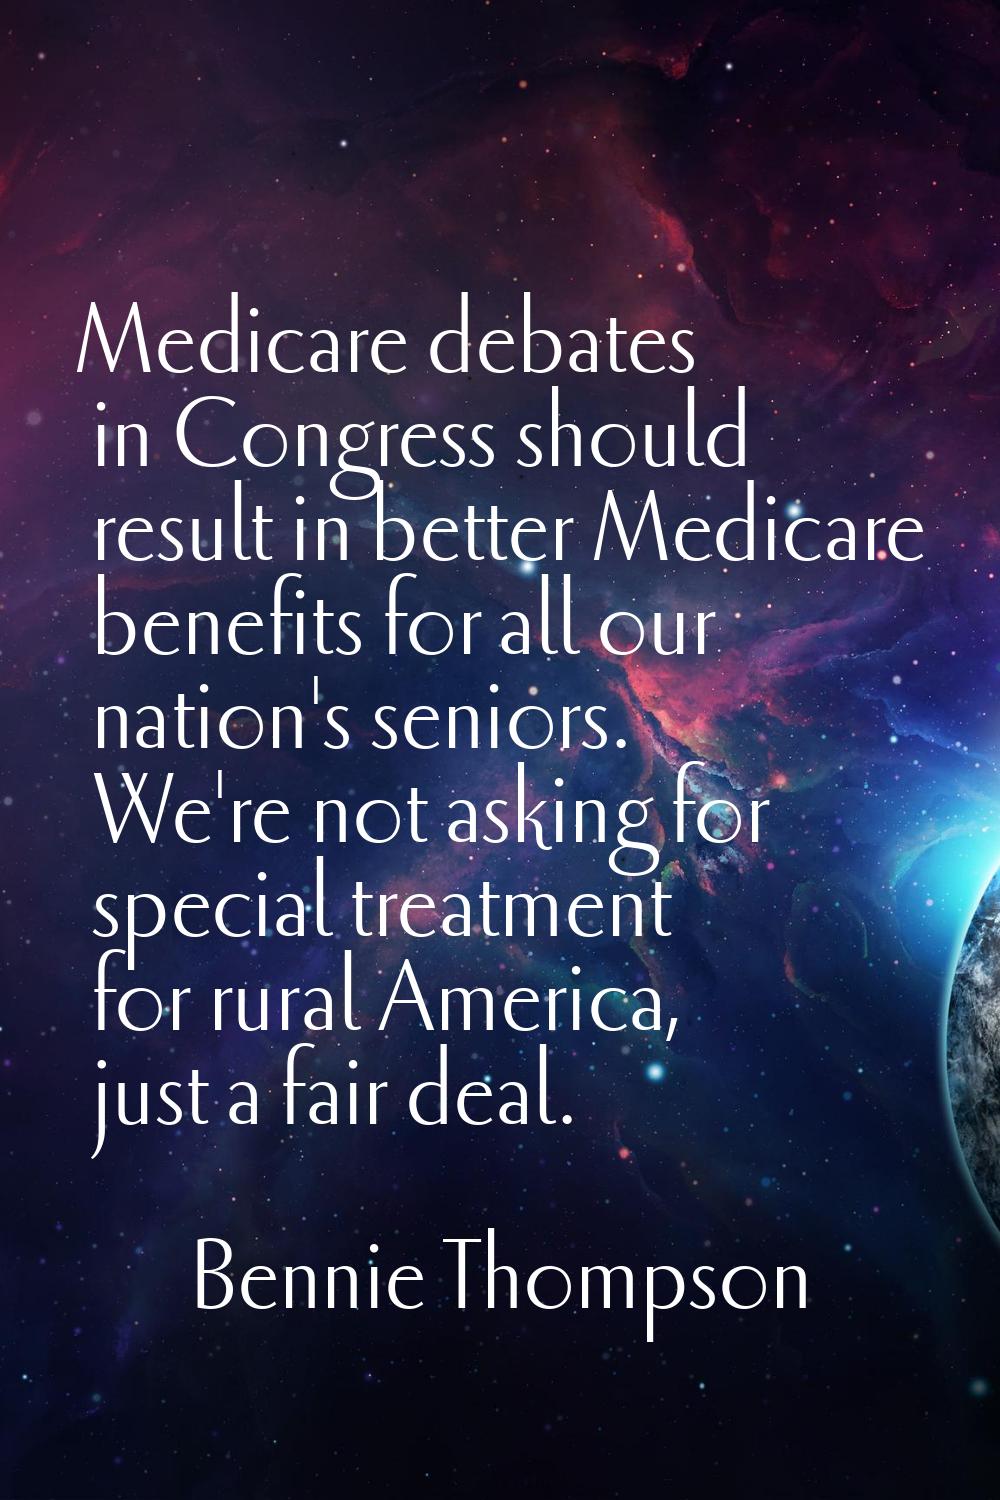 Medicare debates in Congress should result in better Medicare benefits for all our nation's seniors